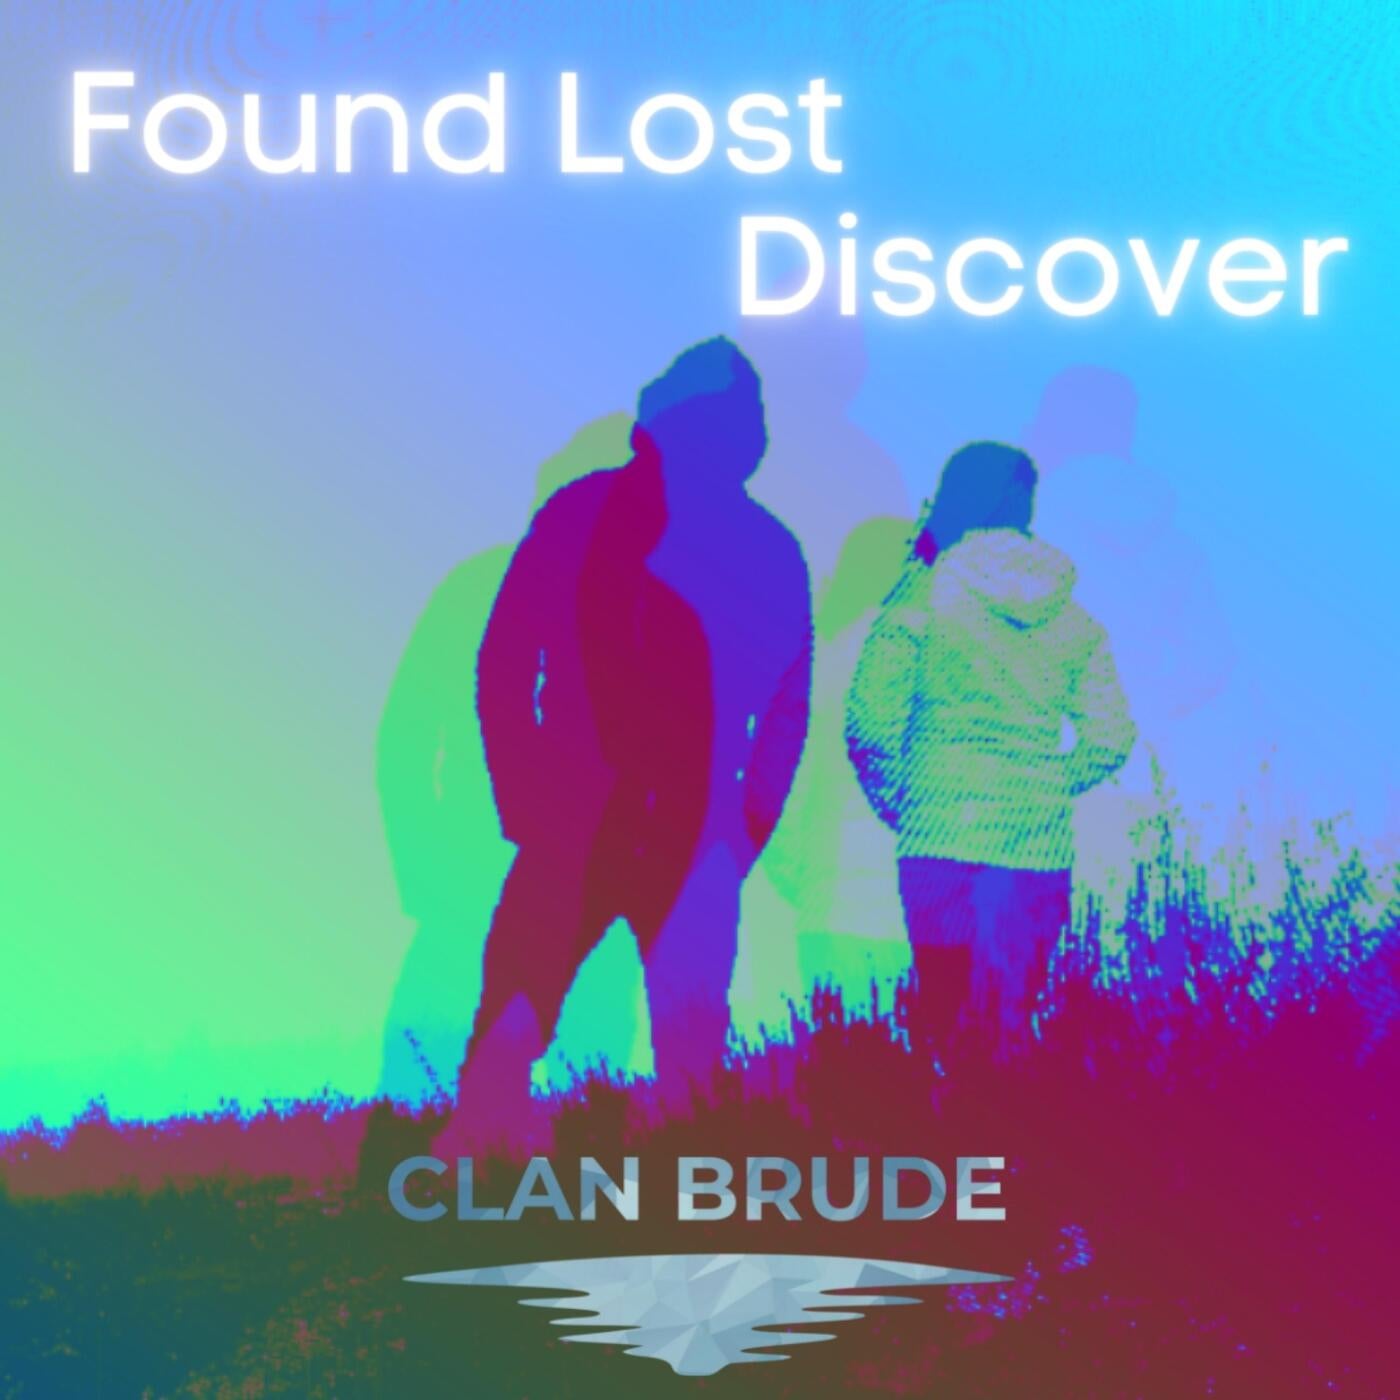 Discover found out. Discovery Clan.